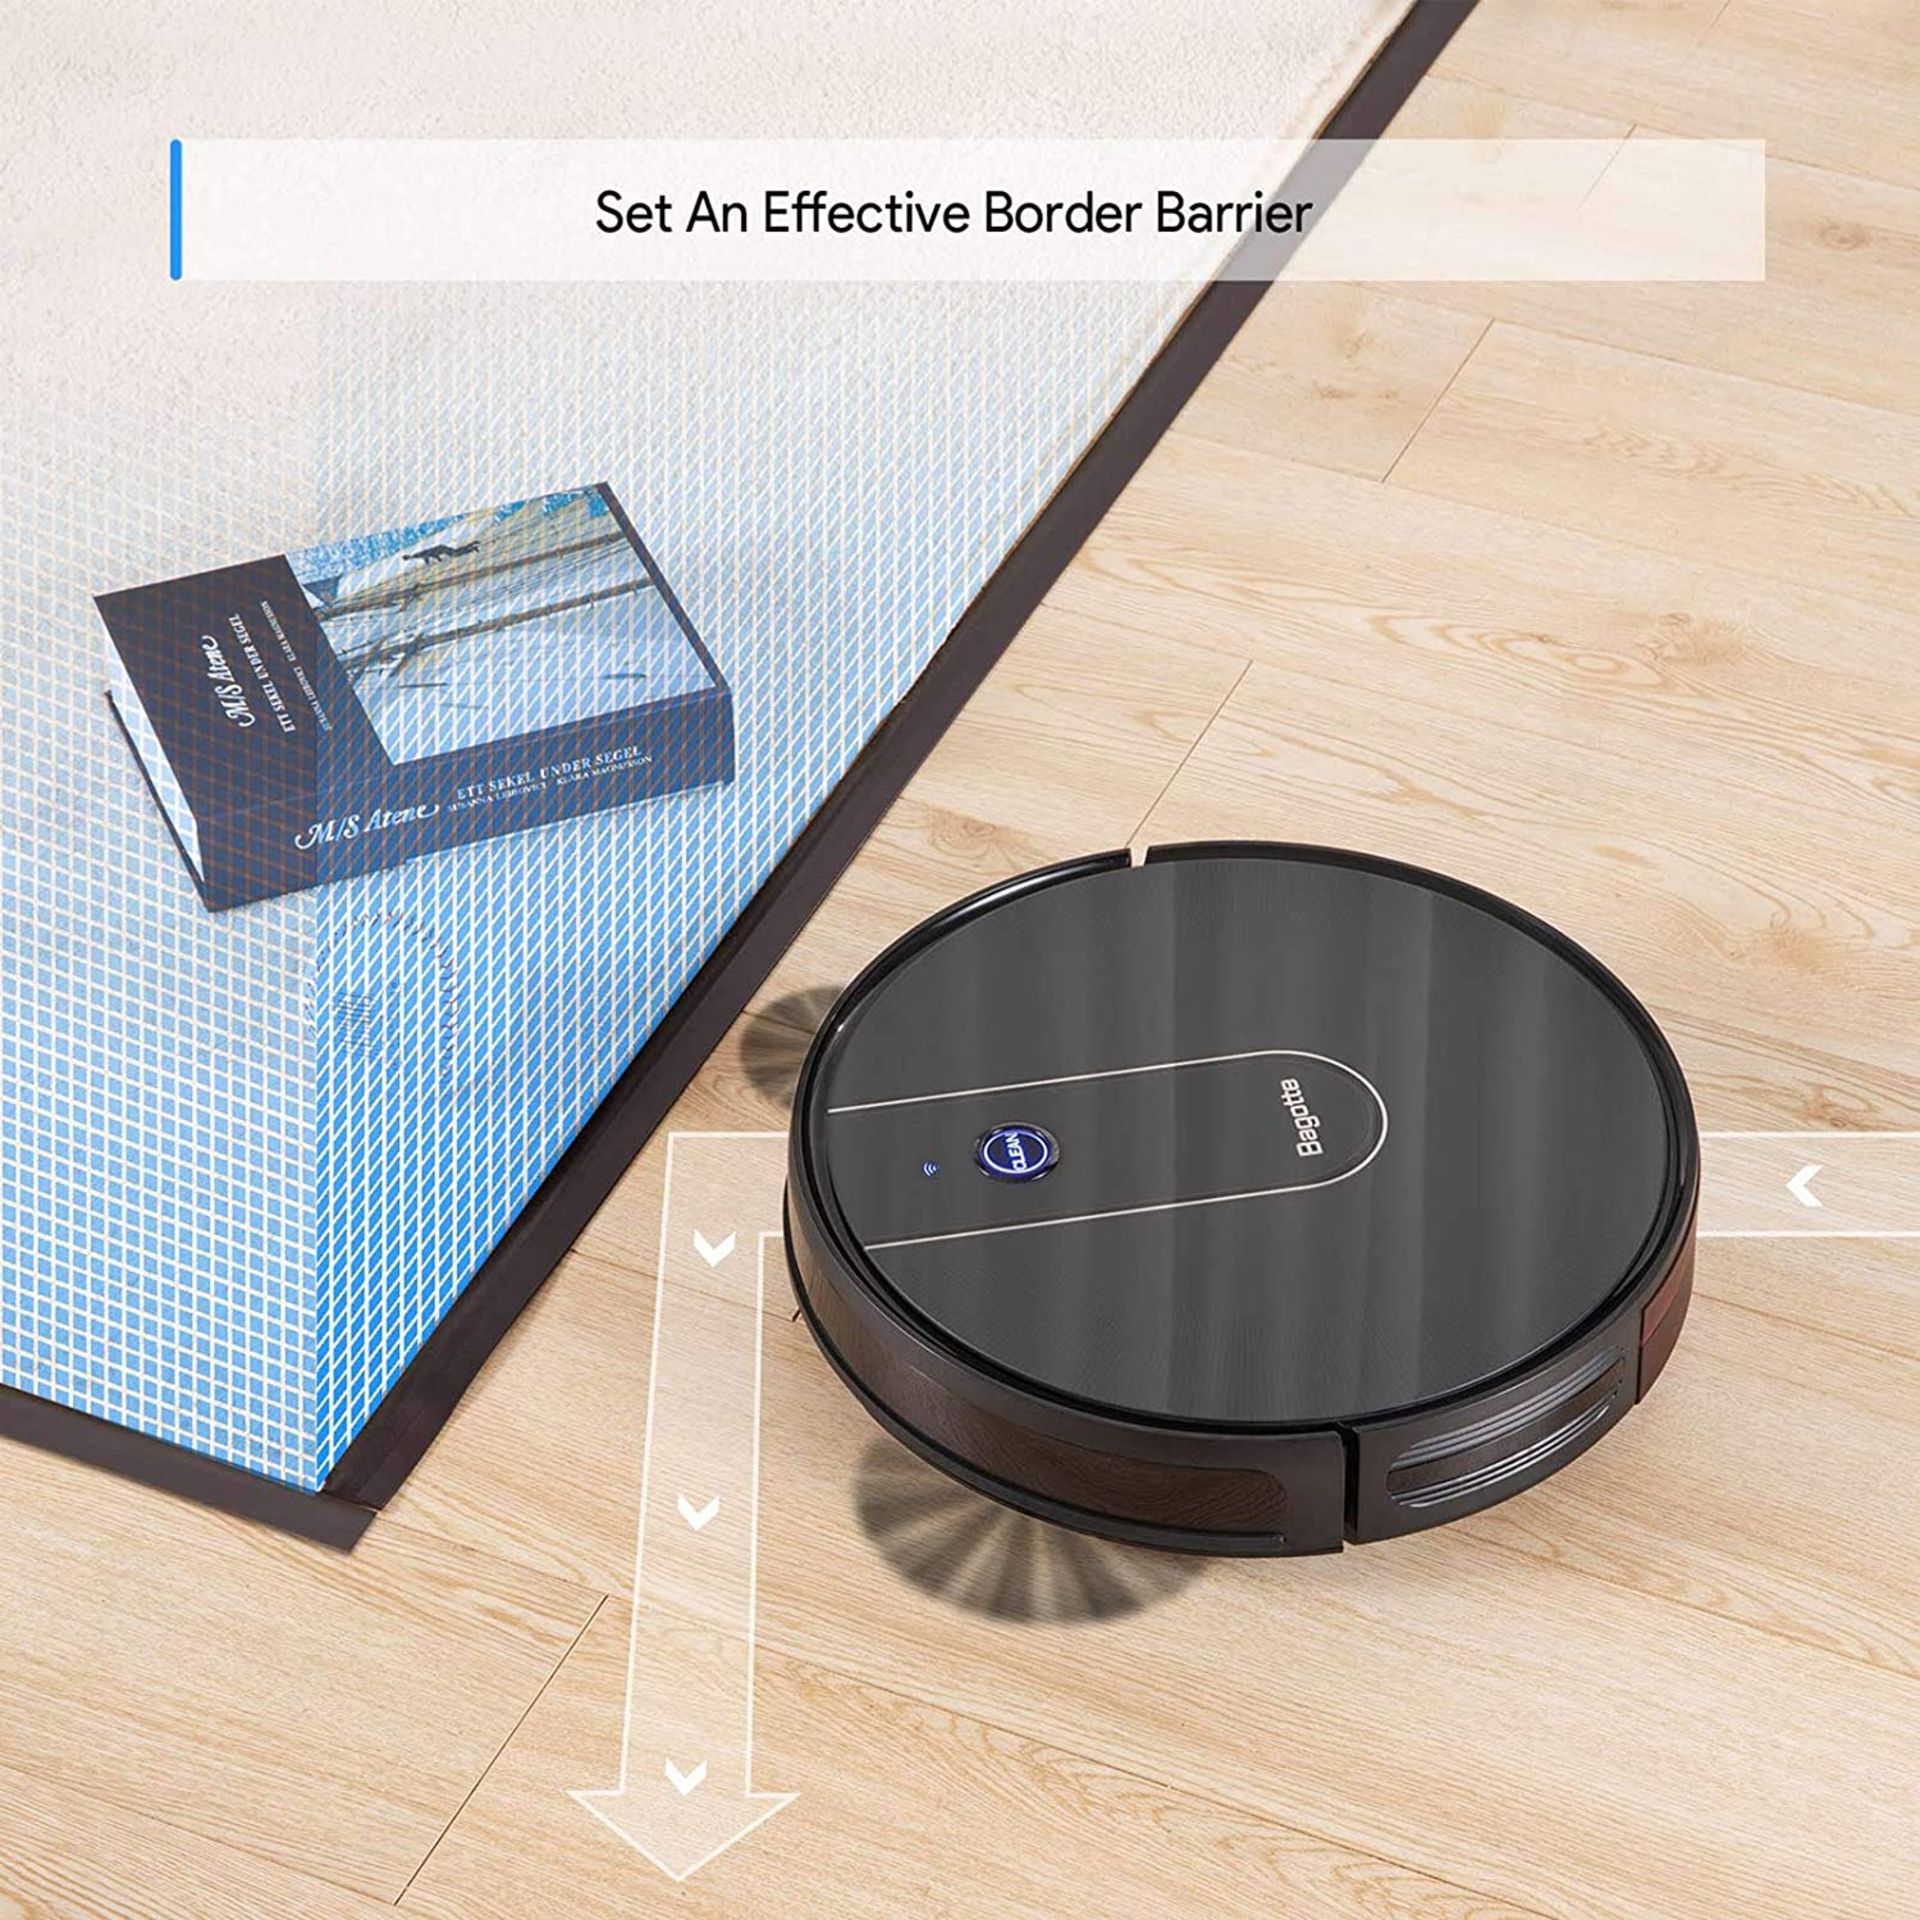 Bagotte BG700 Wi-Fi Robot Vacuum with mop - 2.7" Thin, Strong Suction, Work with Alexa - Bild 3 aus 8